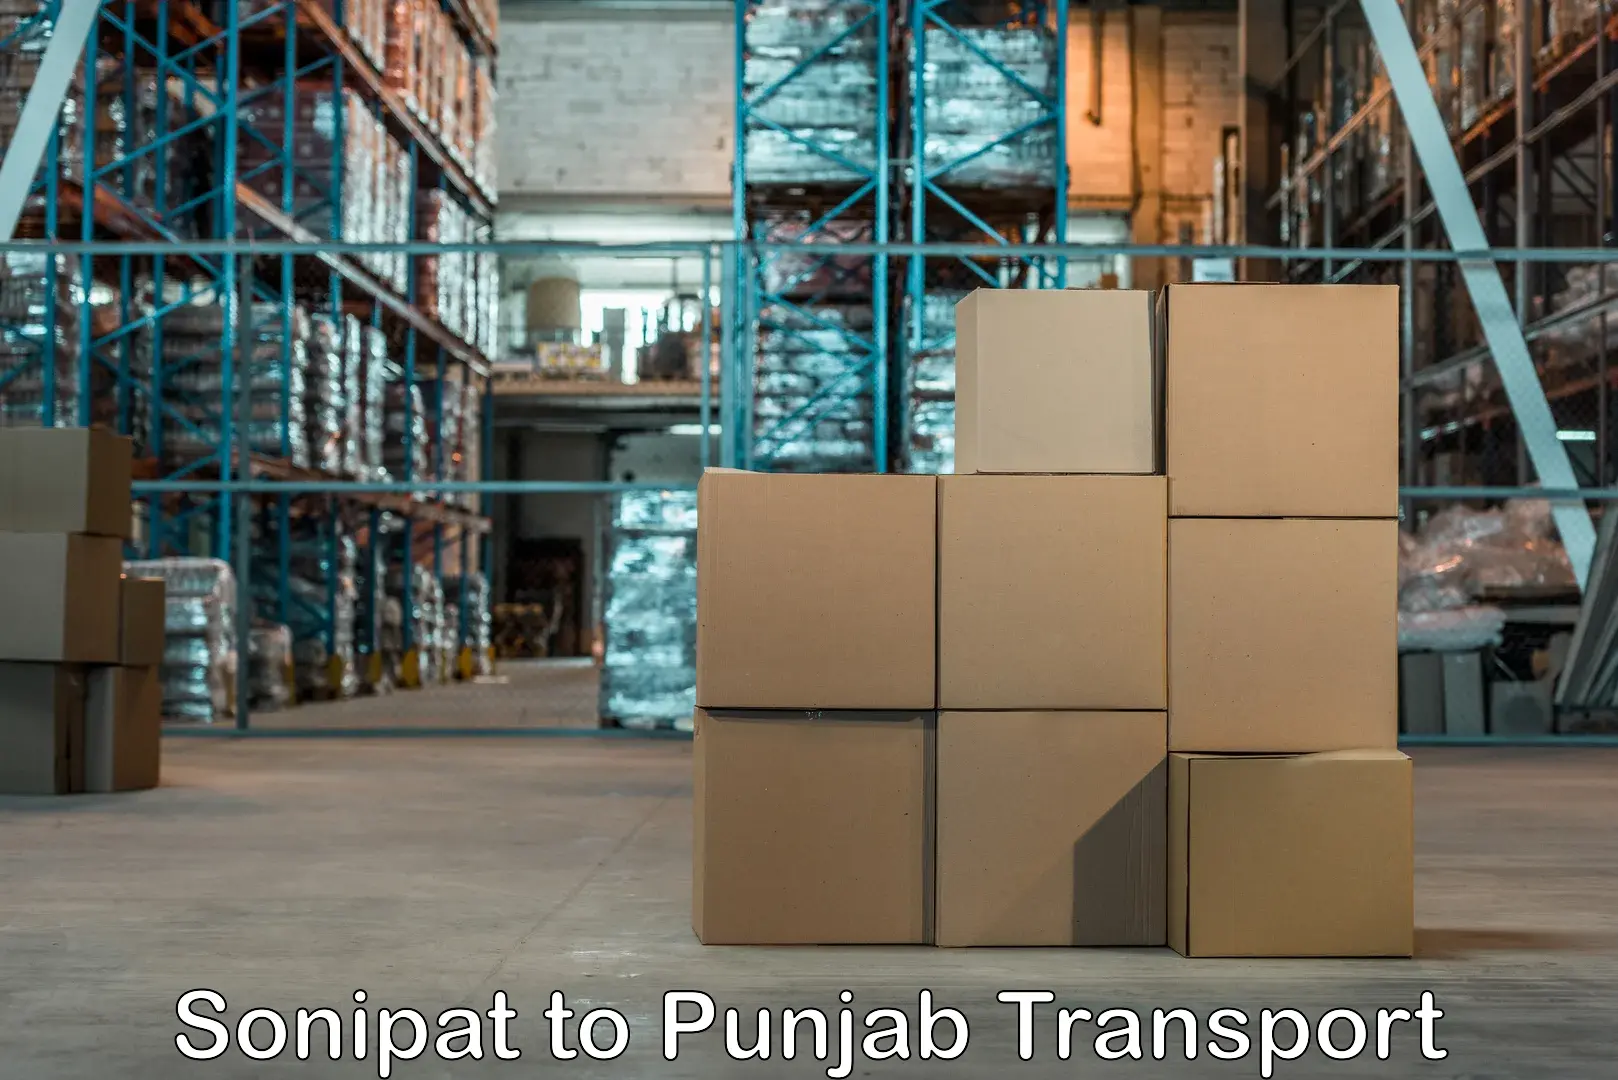 Transport bike from one state to another Sonipat to Punjab